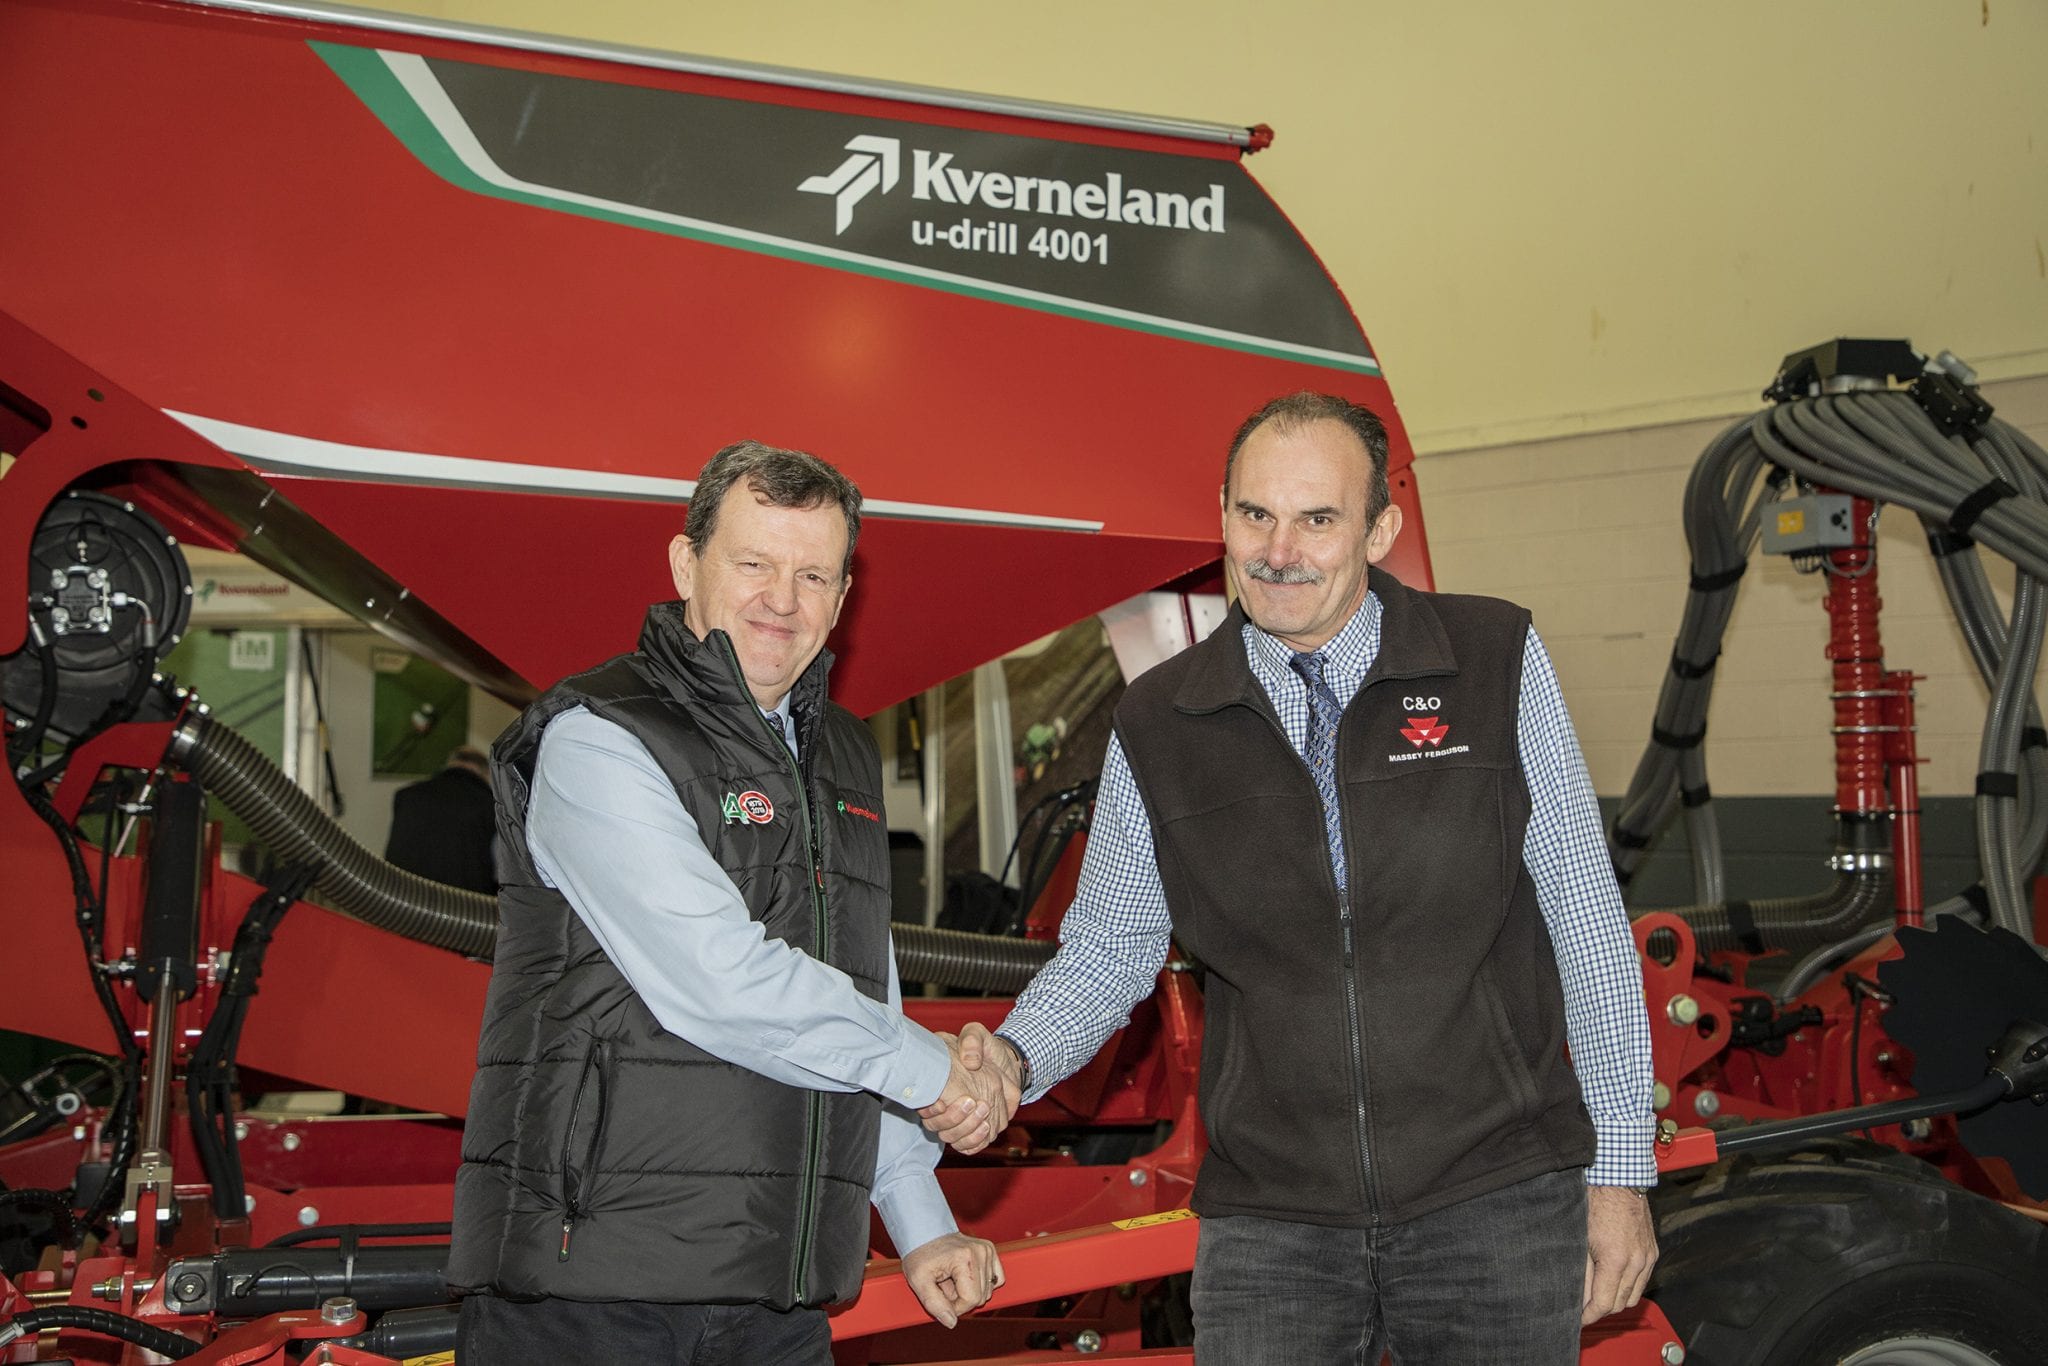 C&O offer Kverneland to more customers